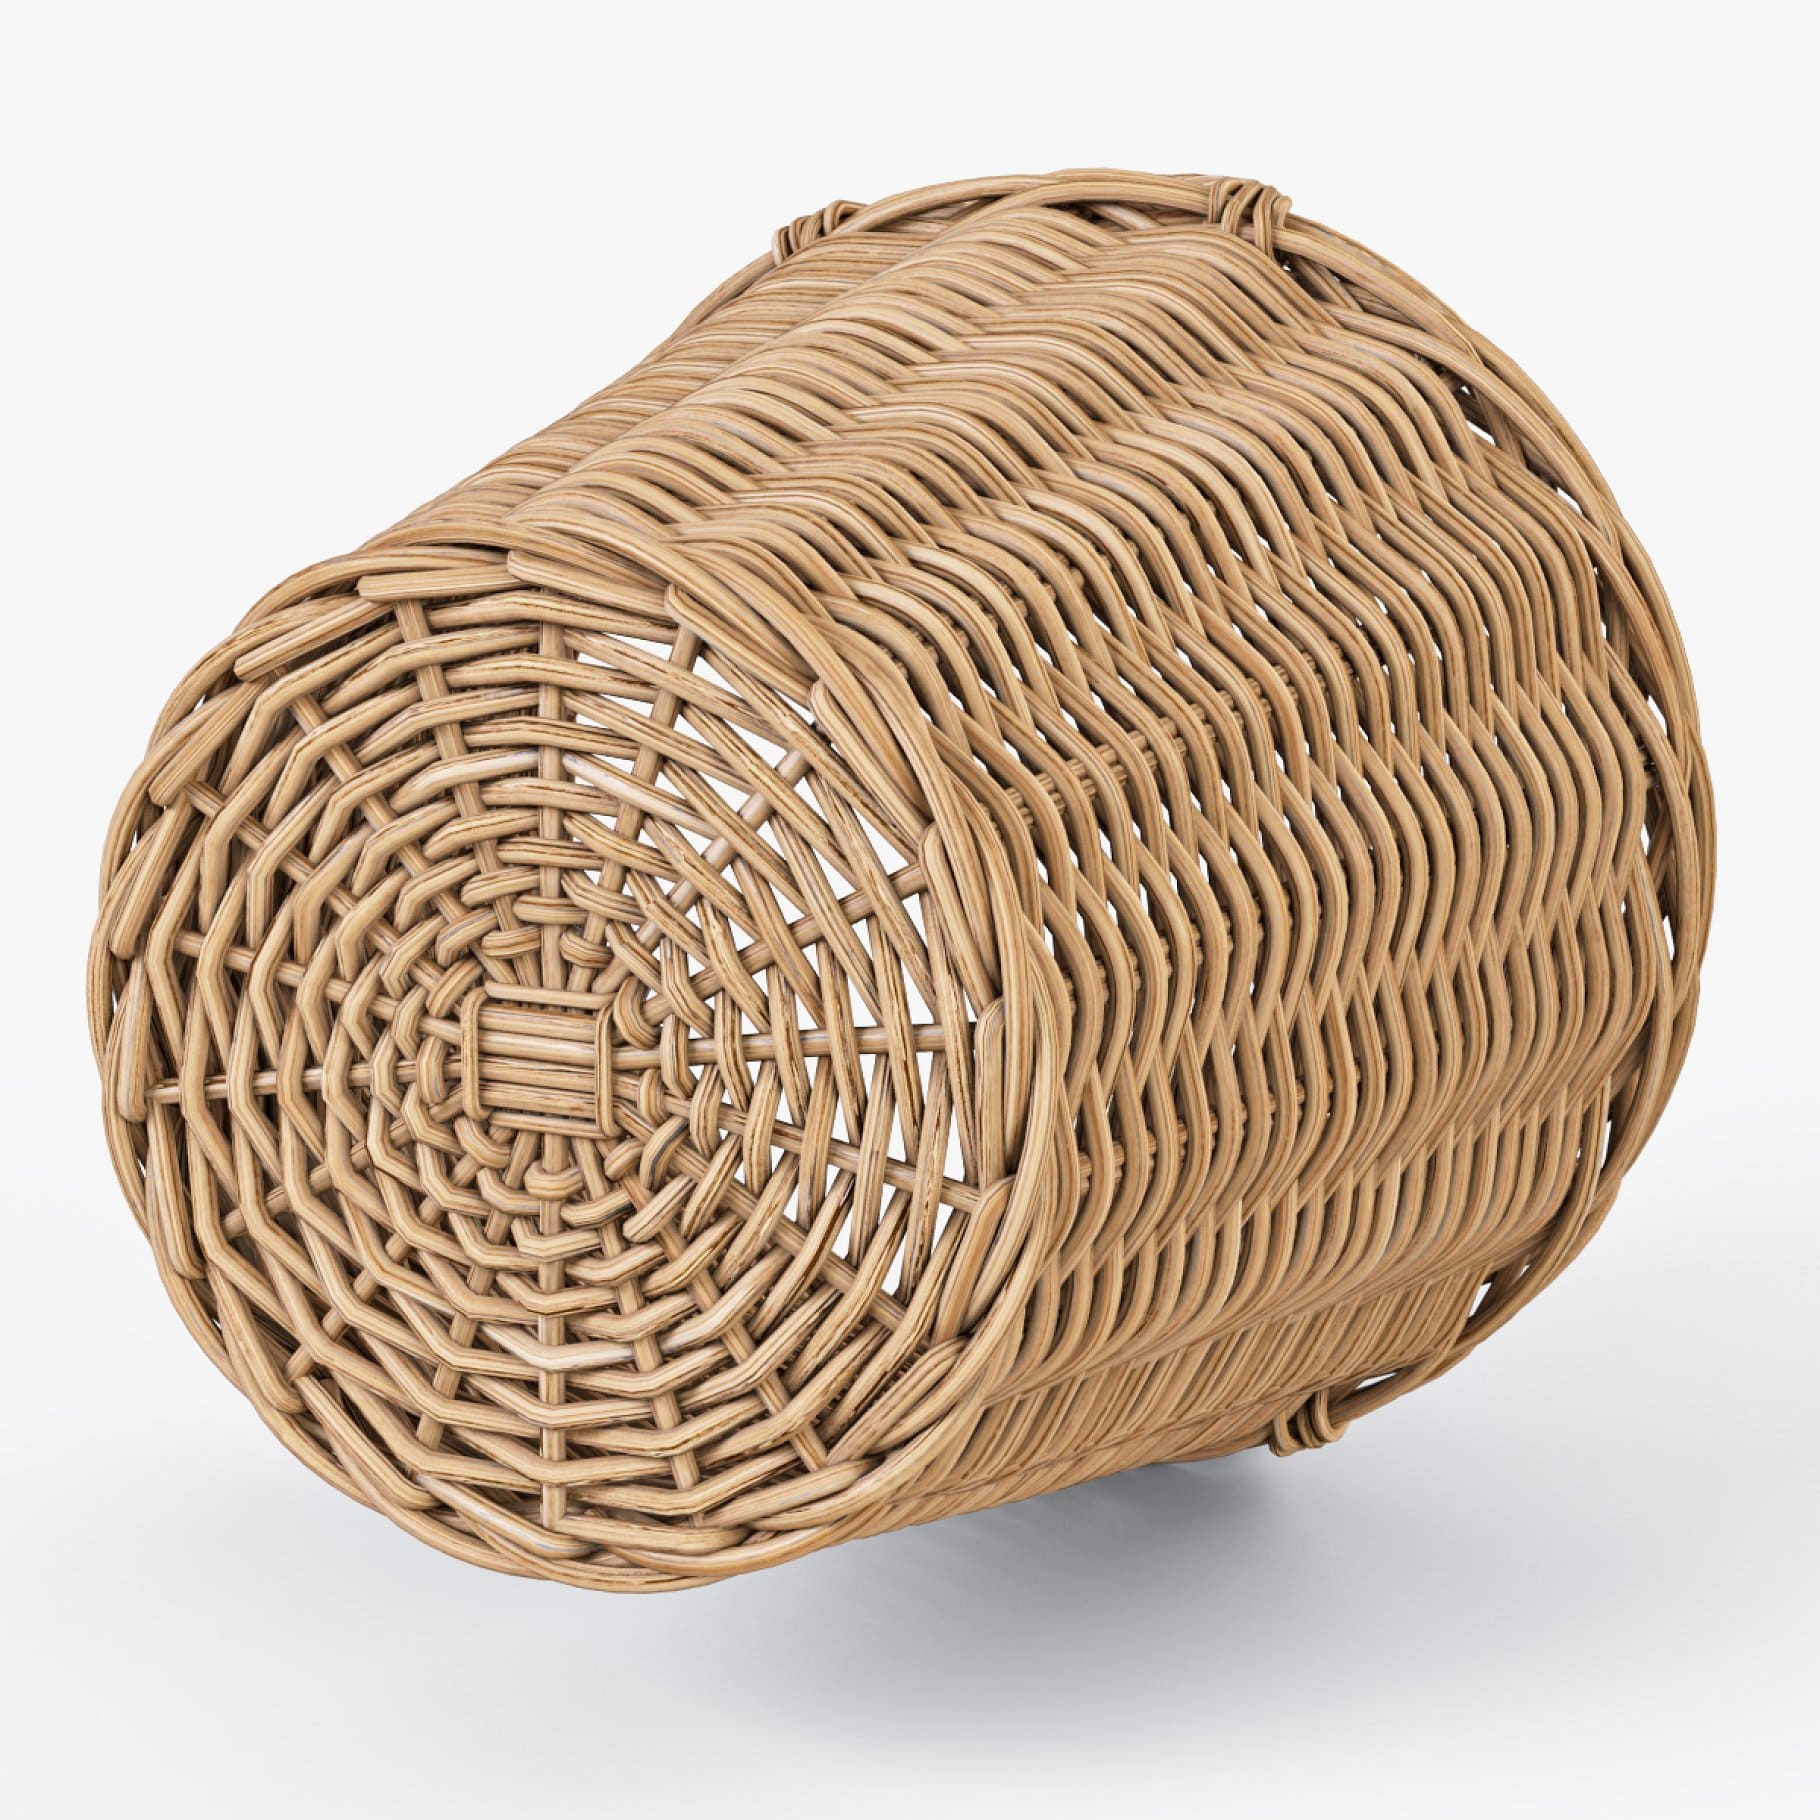 The outer side of the basket.